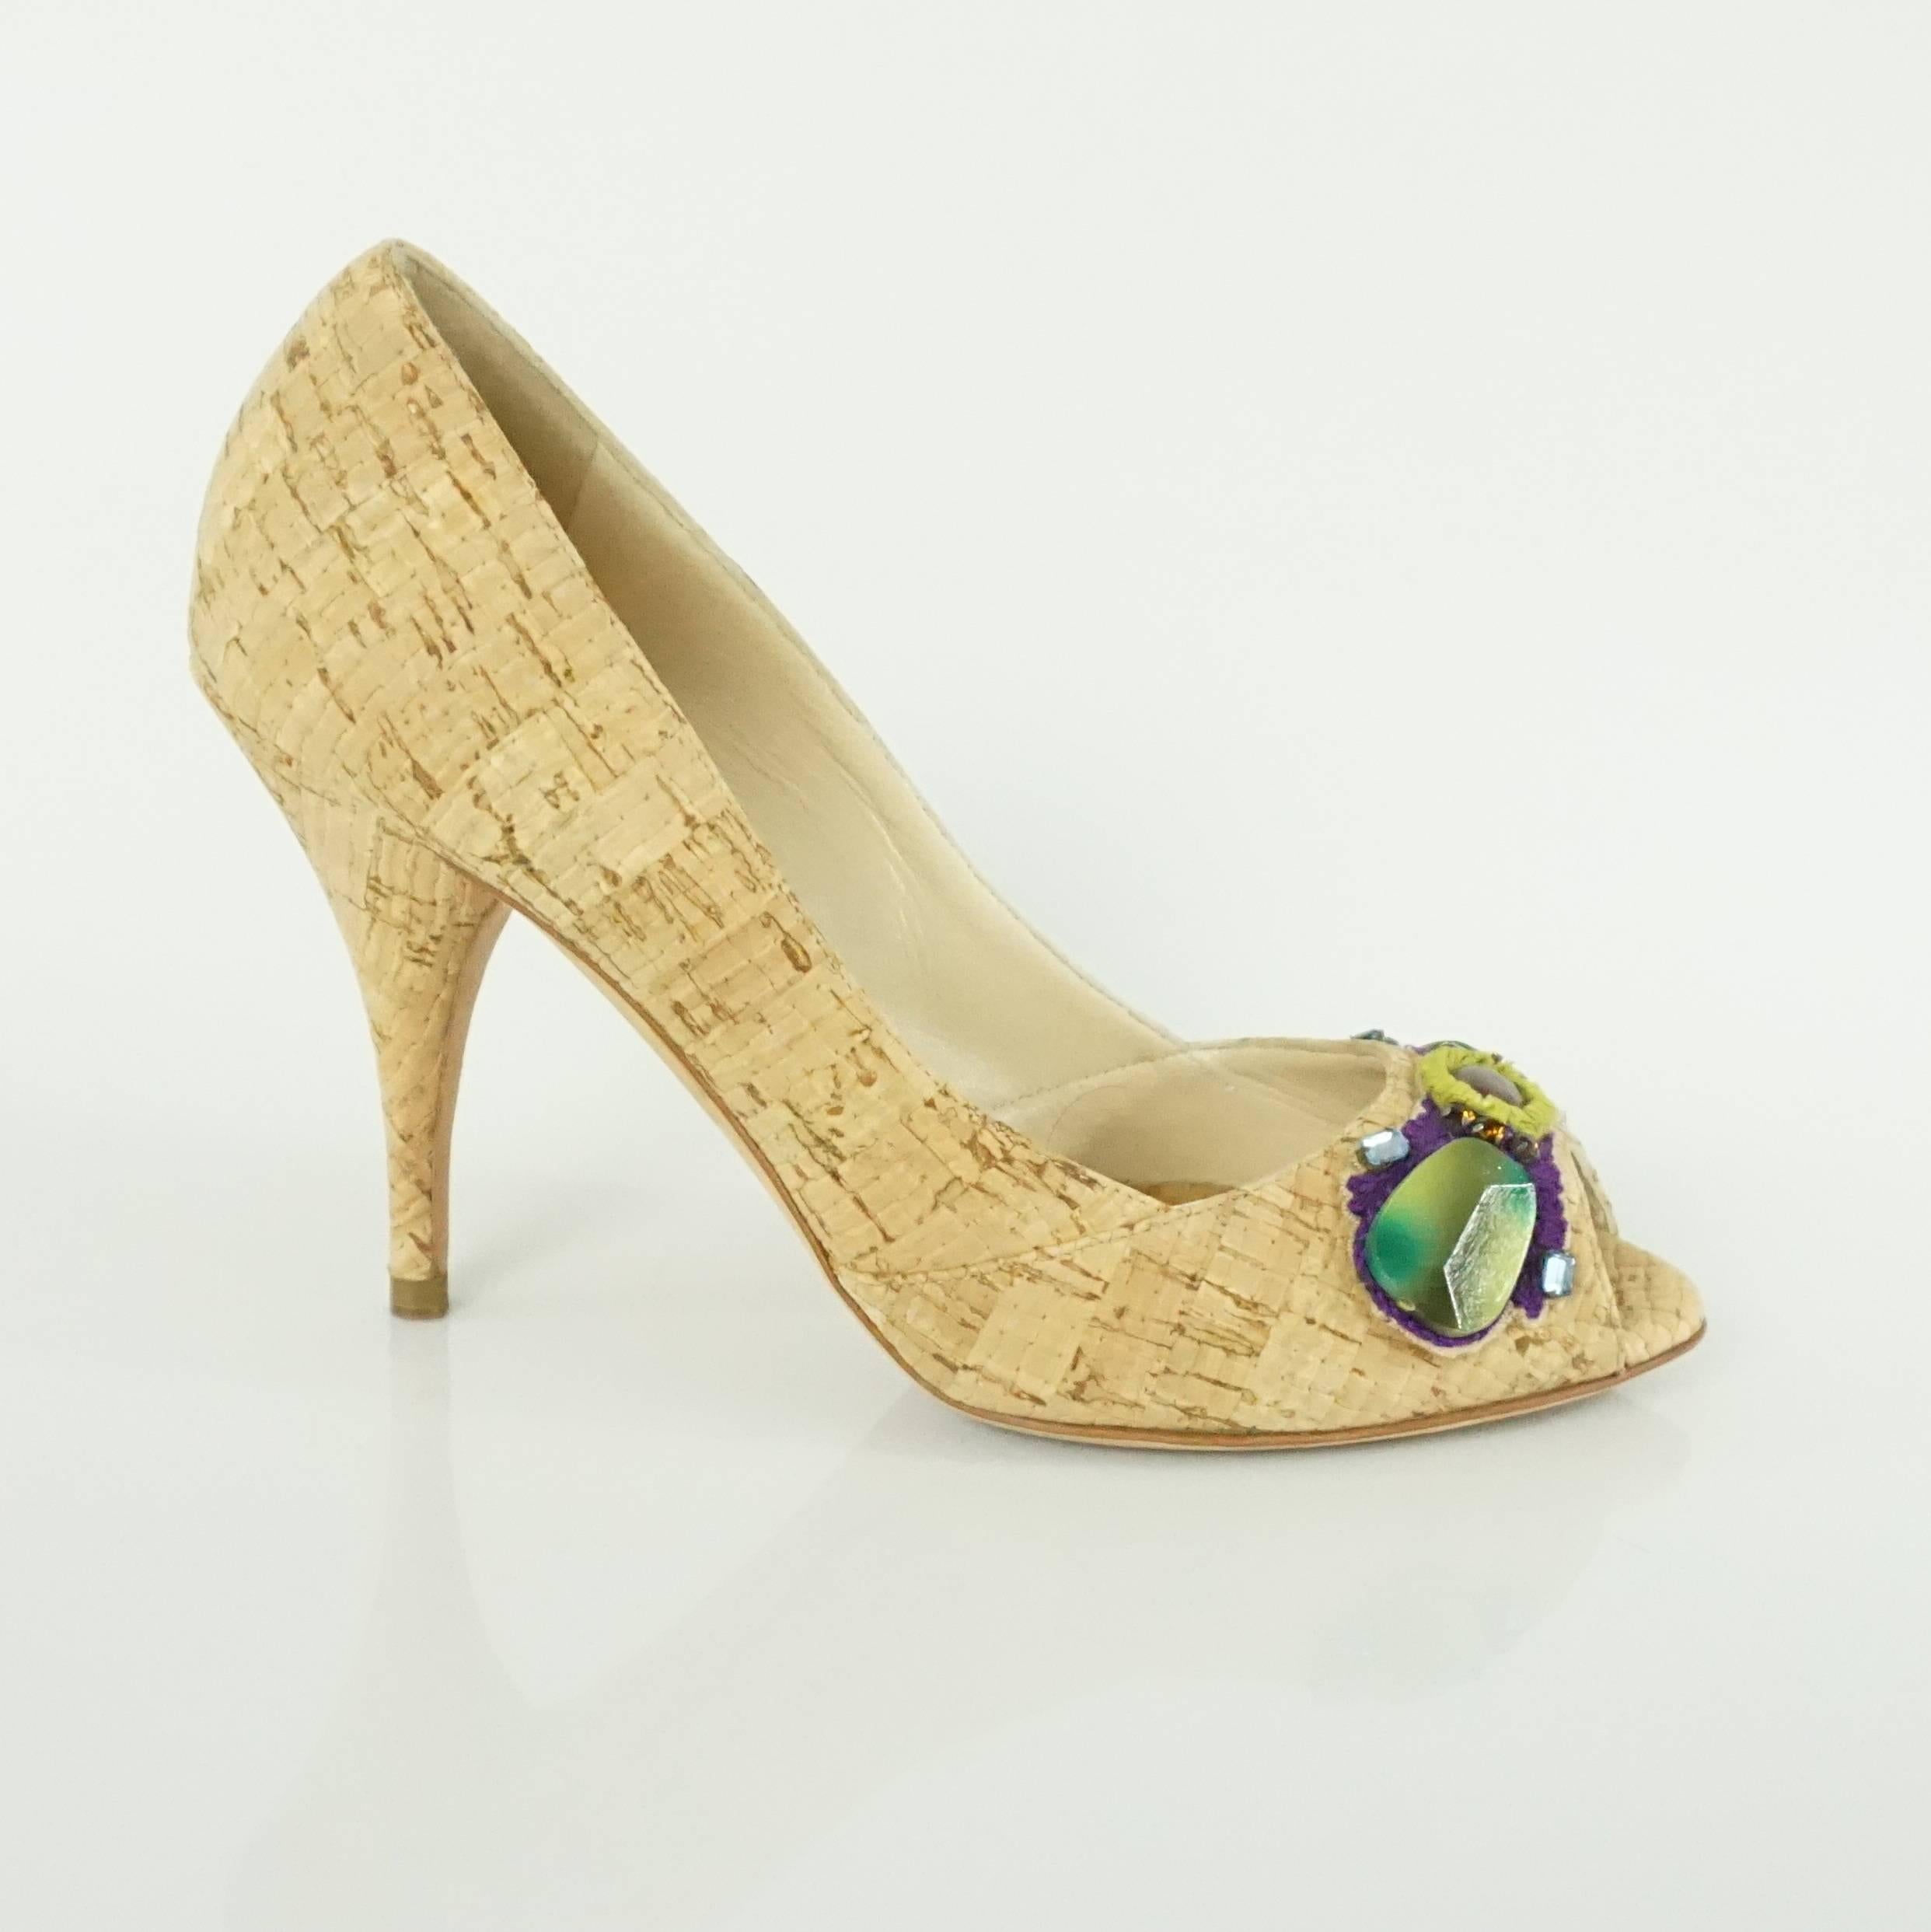 These Oscar de la Renta cork heels have a tropical chic feel. They have a peep toe and embroidered, rhinestone, and stone cluster in the front. The heels are in excellent condition with some bottom wear and minor marks near the back as seen on the